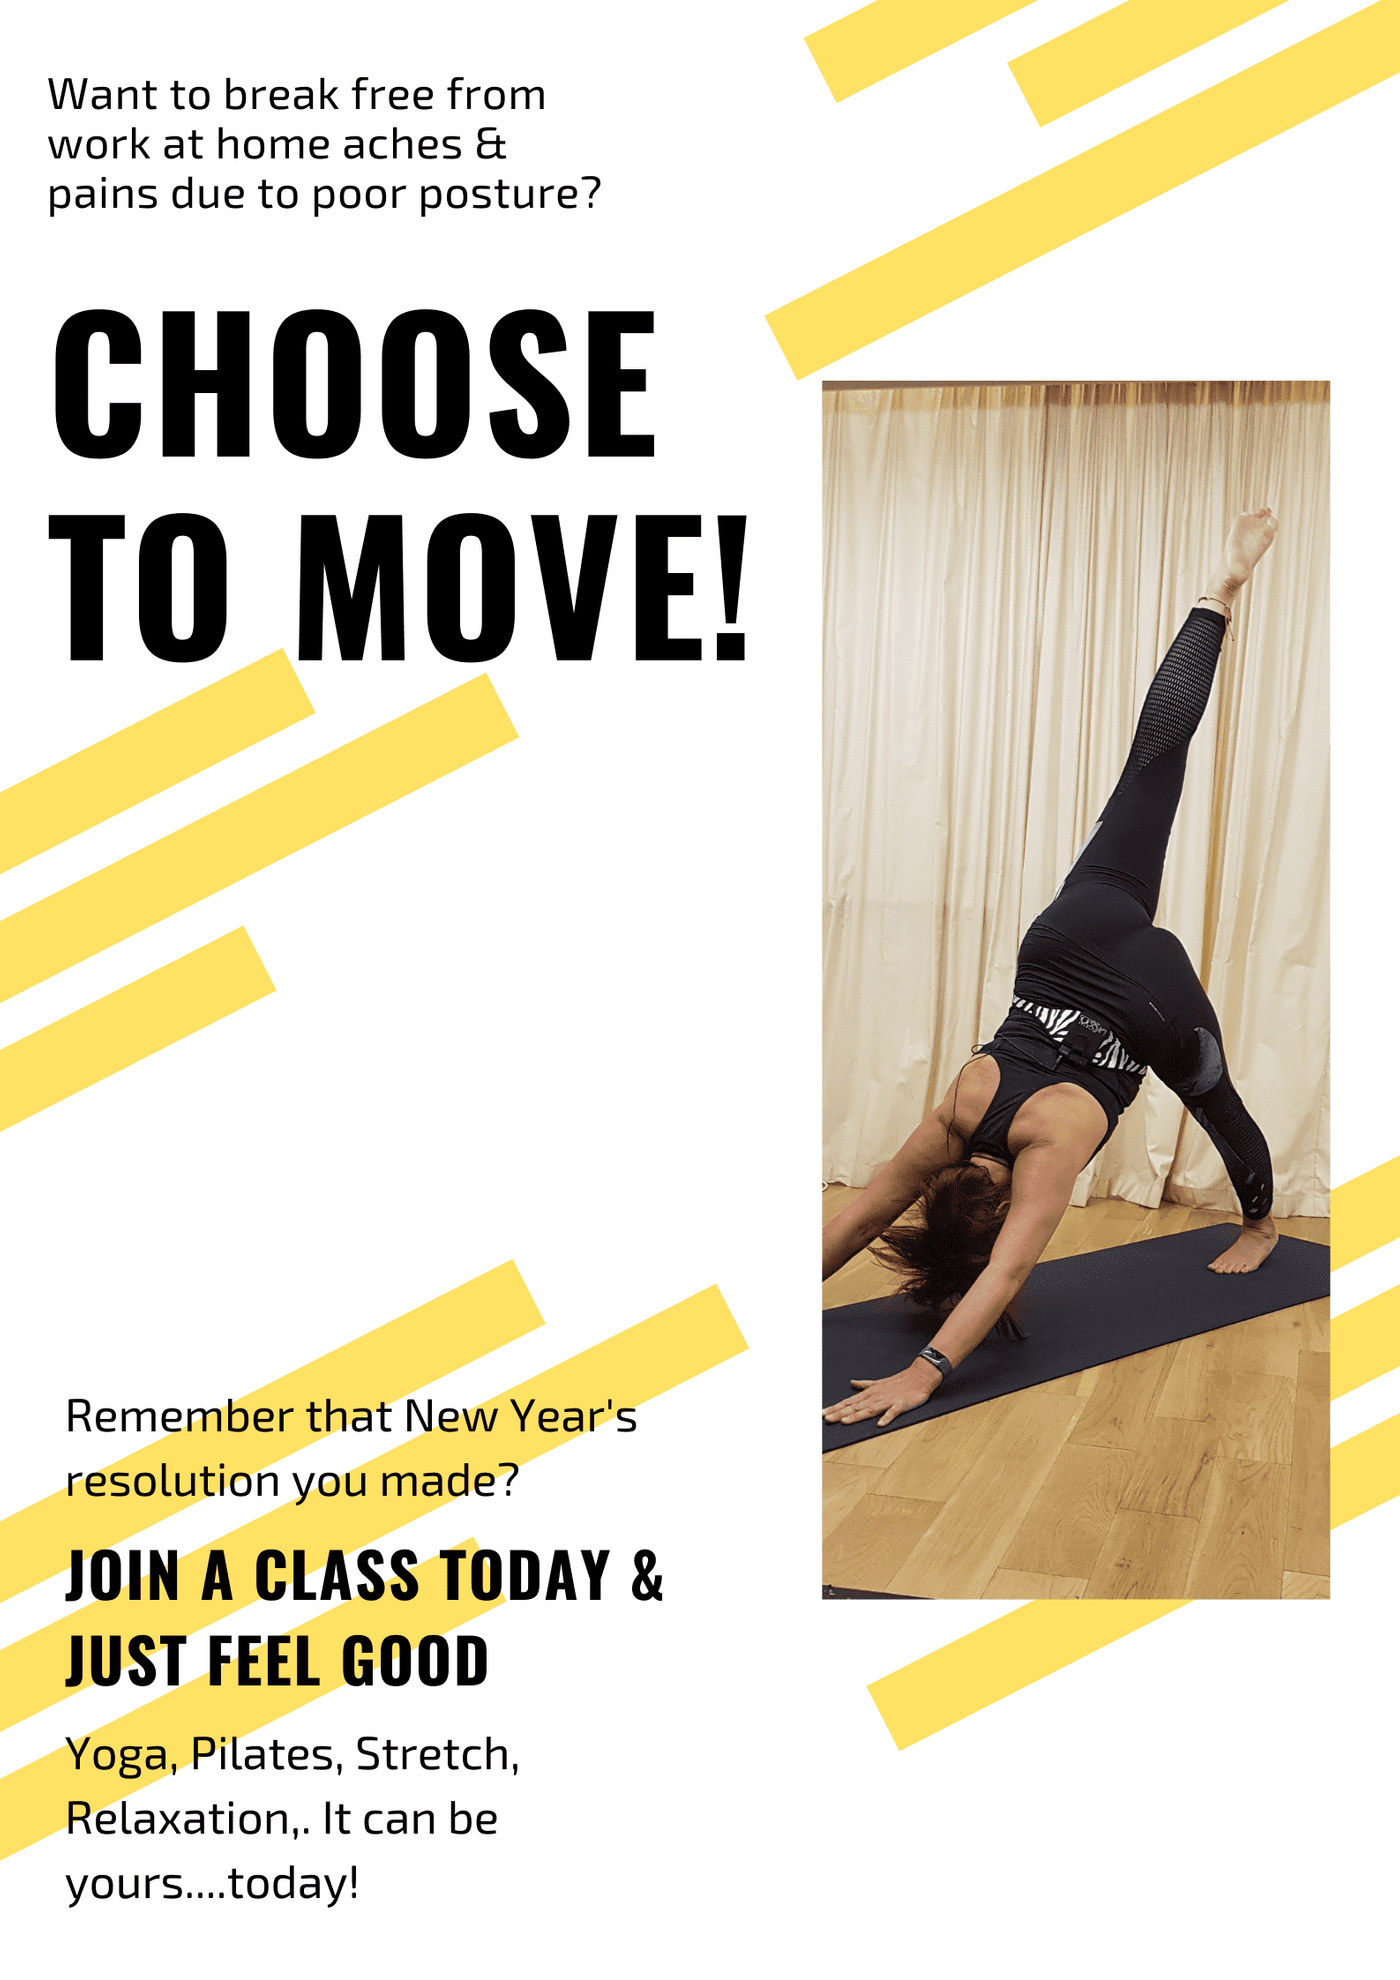 If you are working from home and feeling those aches & pains from being hunched over your laptop......... give yourself a break. Choose to move and feel fantastic for it!